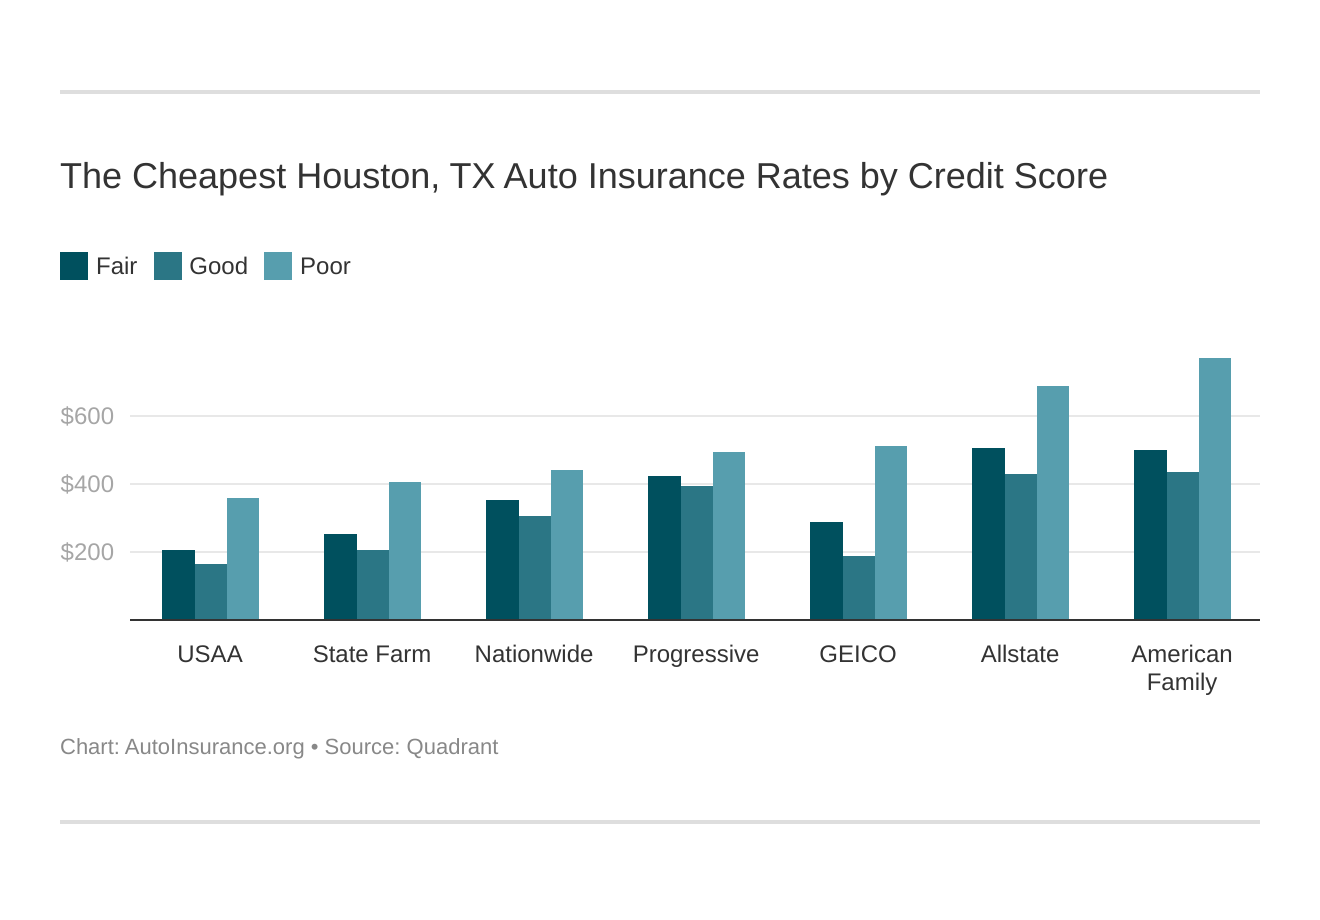 The Cheapest Houston, TX Auto Insurance Rates by Credit Score